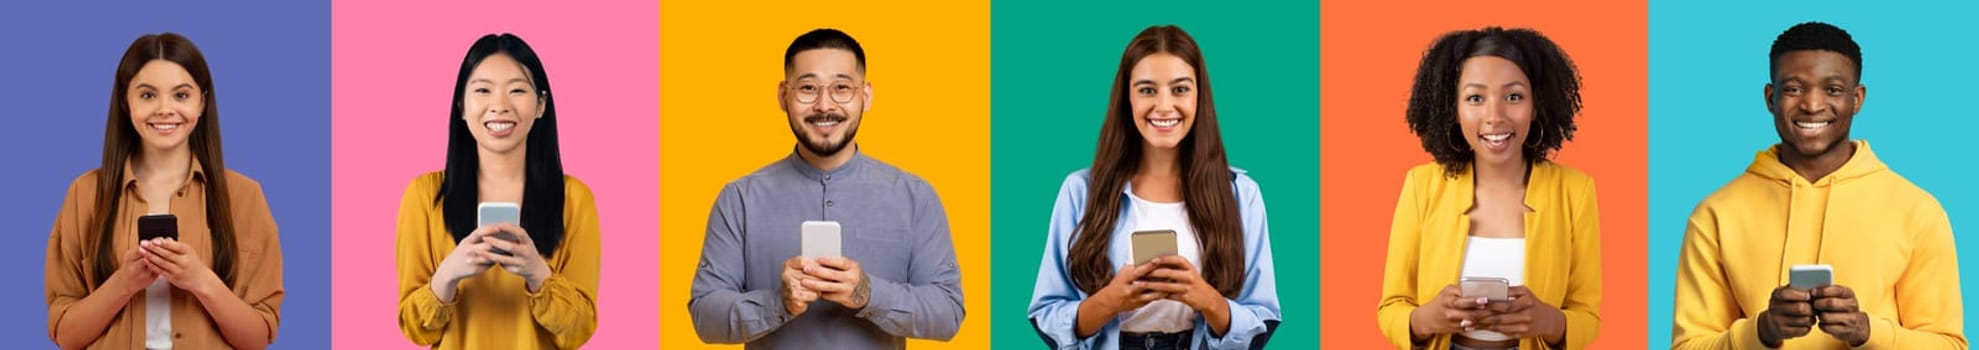 Cheerful men and women of diverse ethnic backgrounds smiling and engaging with smartphones